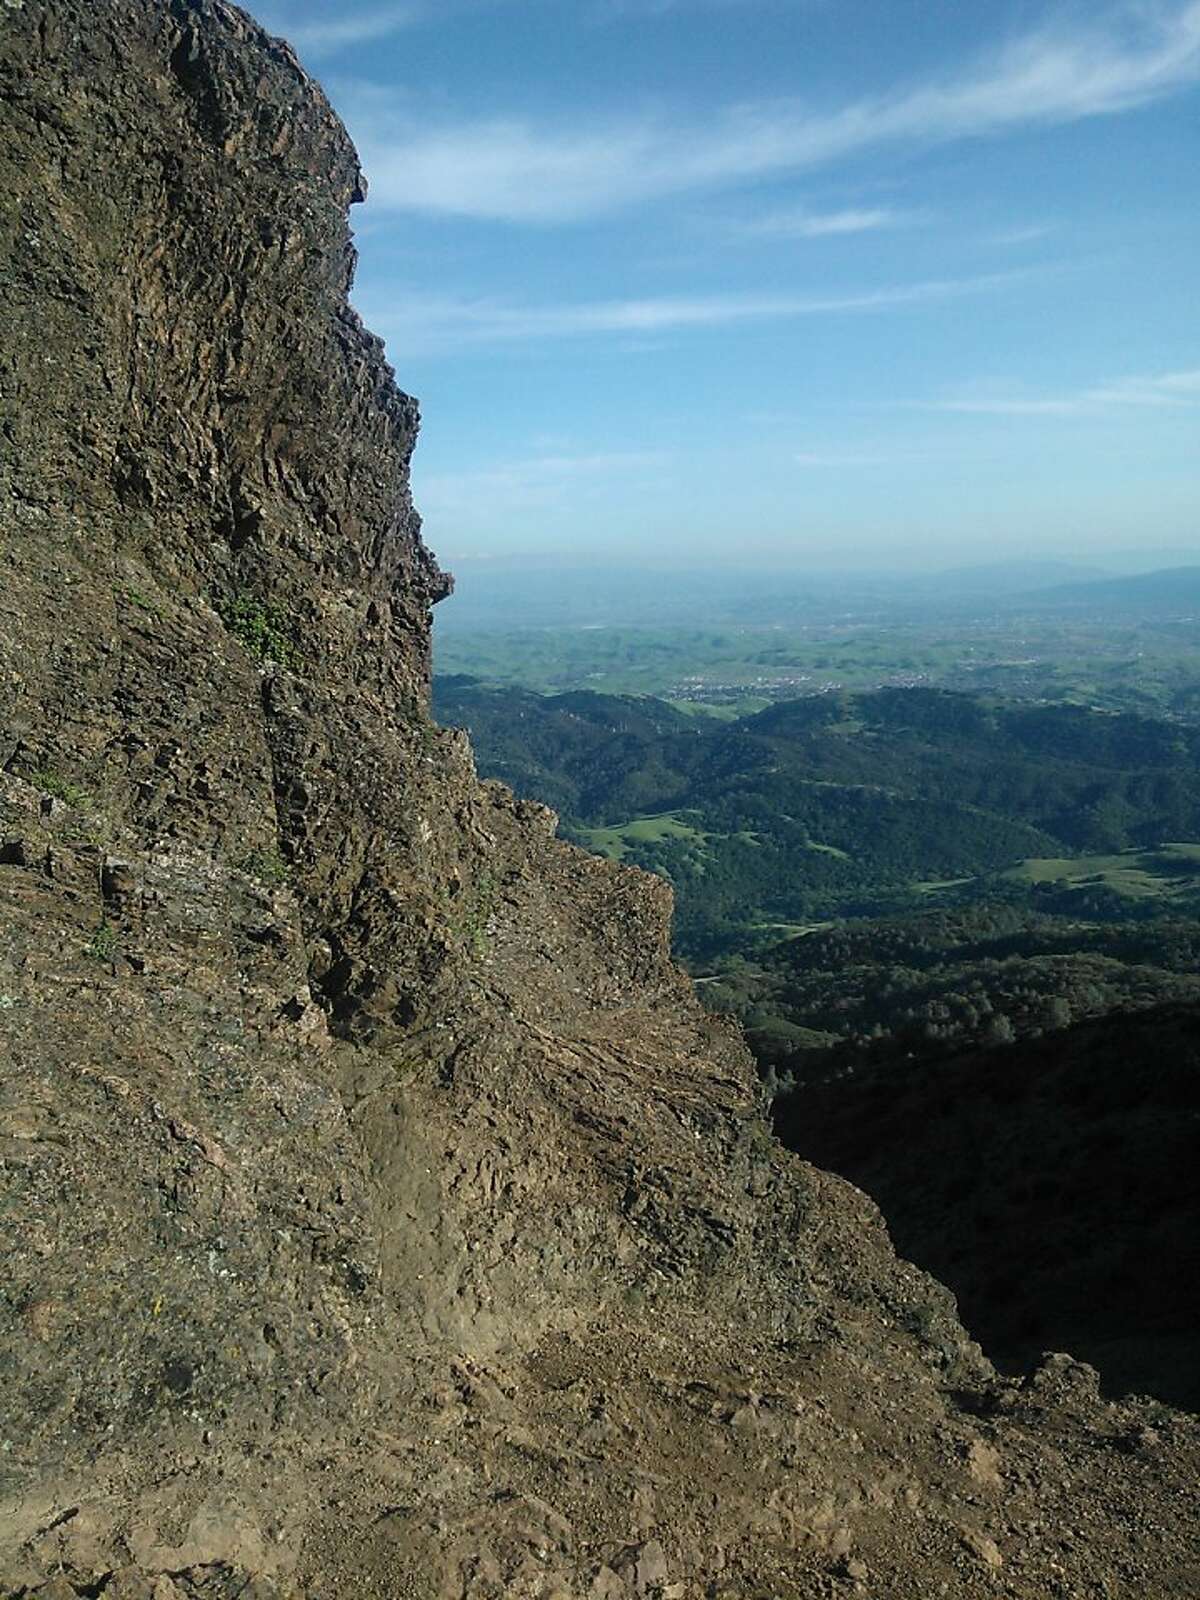 Check out the view from the peak of Mt. Diablo during a New Year's Day bike ride.